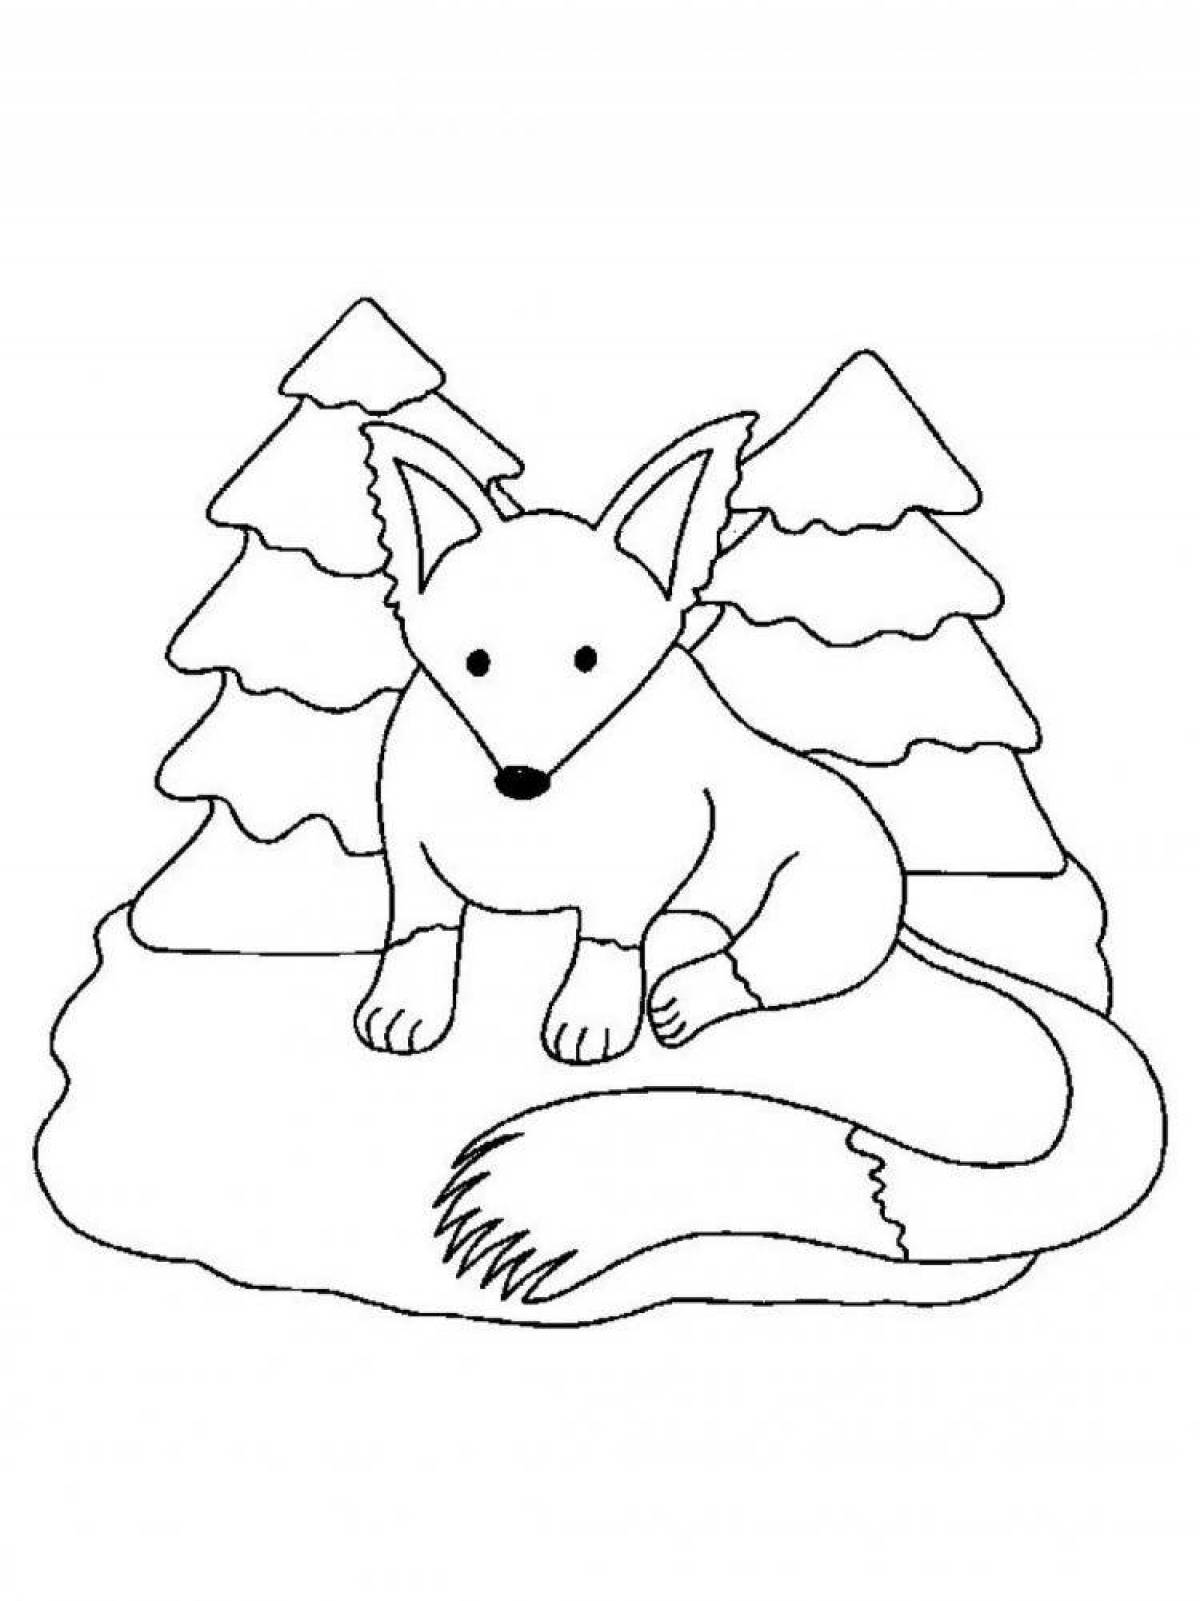 Radiant coloring page animals in winter